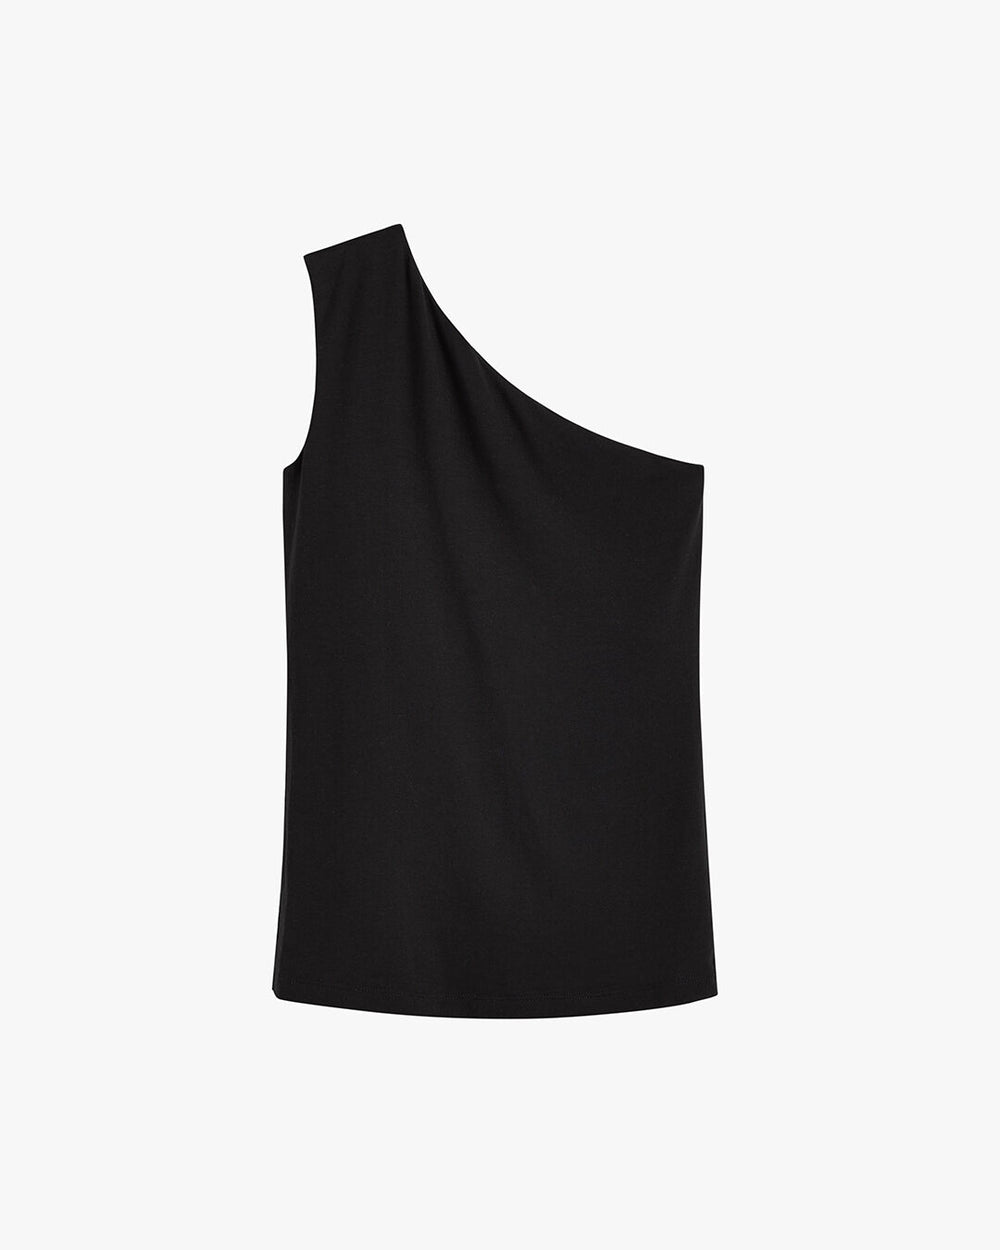 One-shoulder sleeveless top displayed against a plain background.